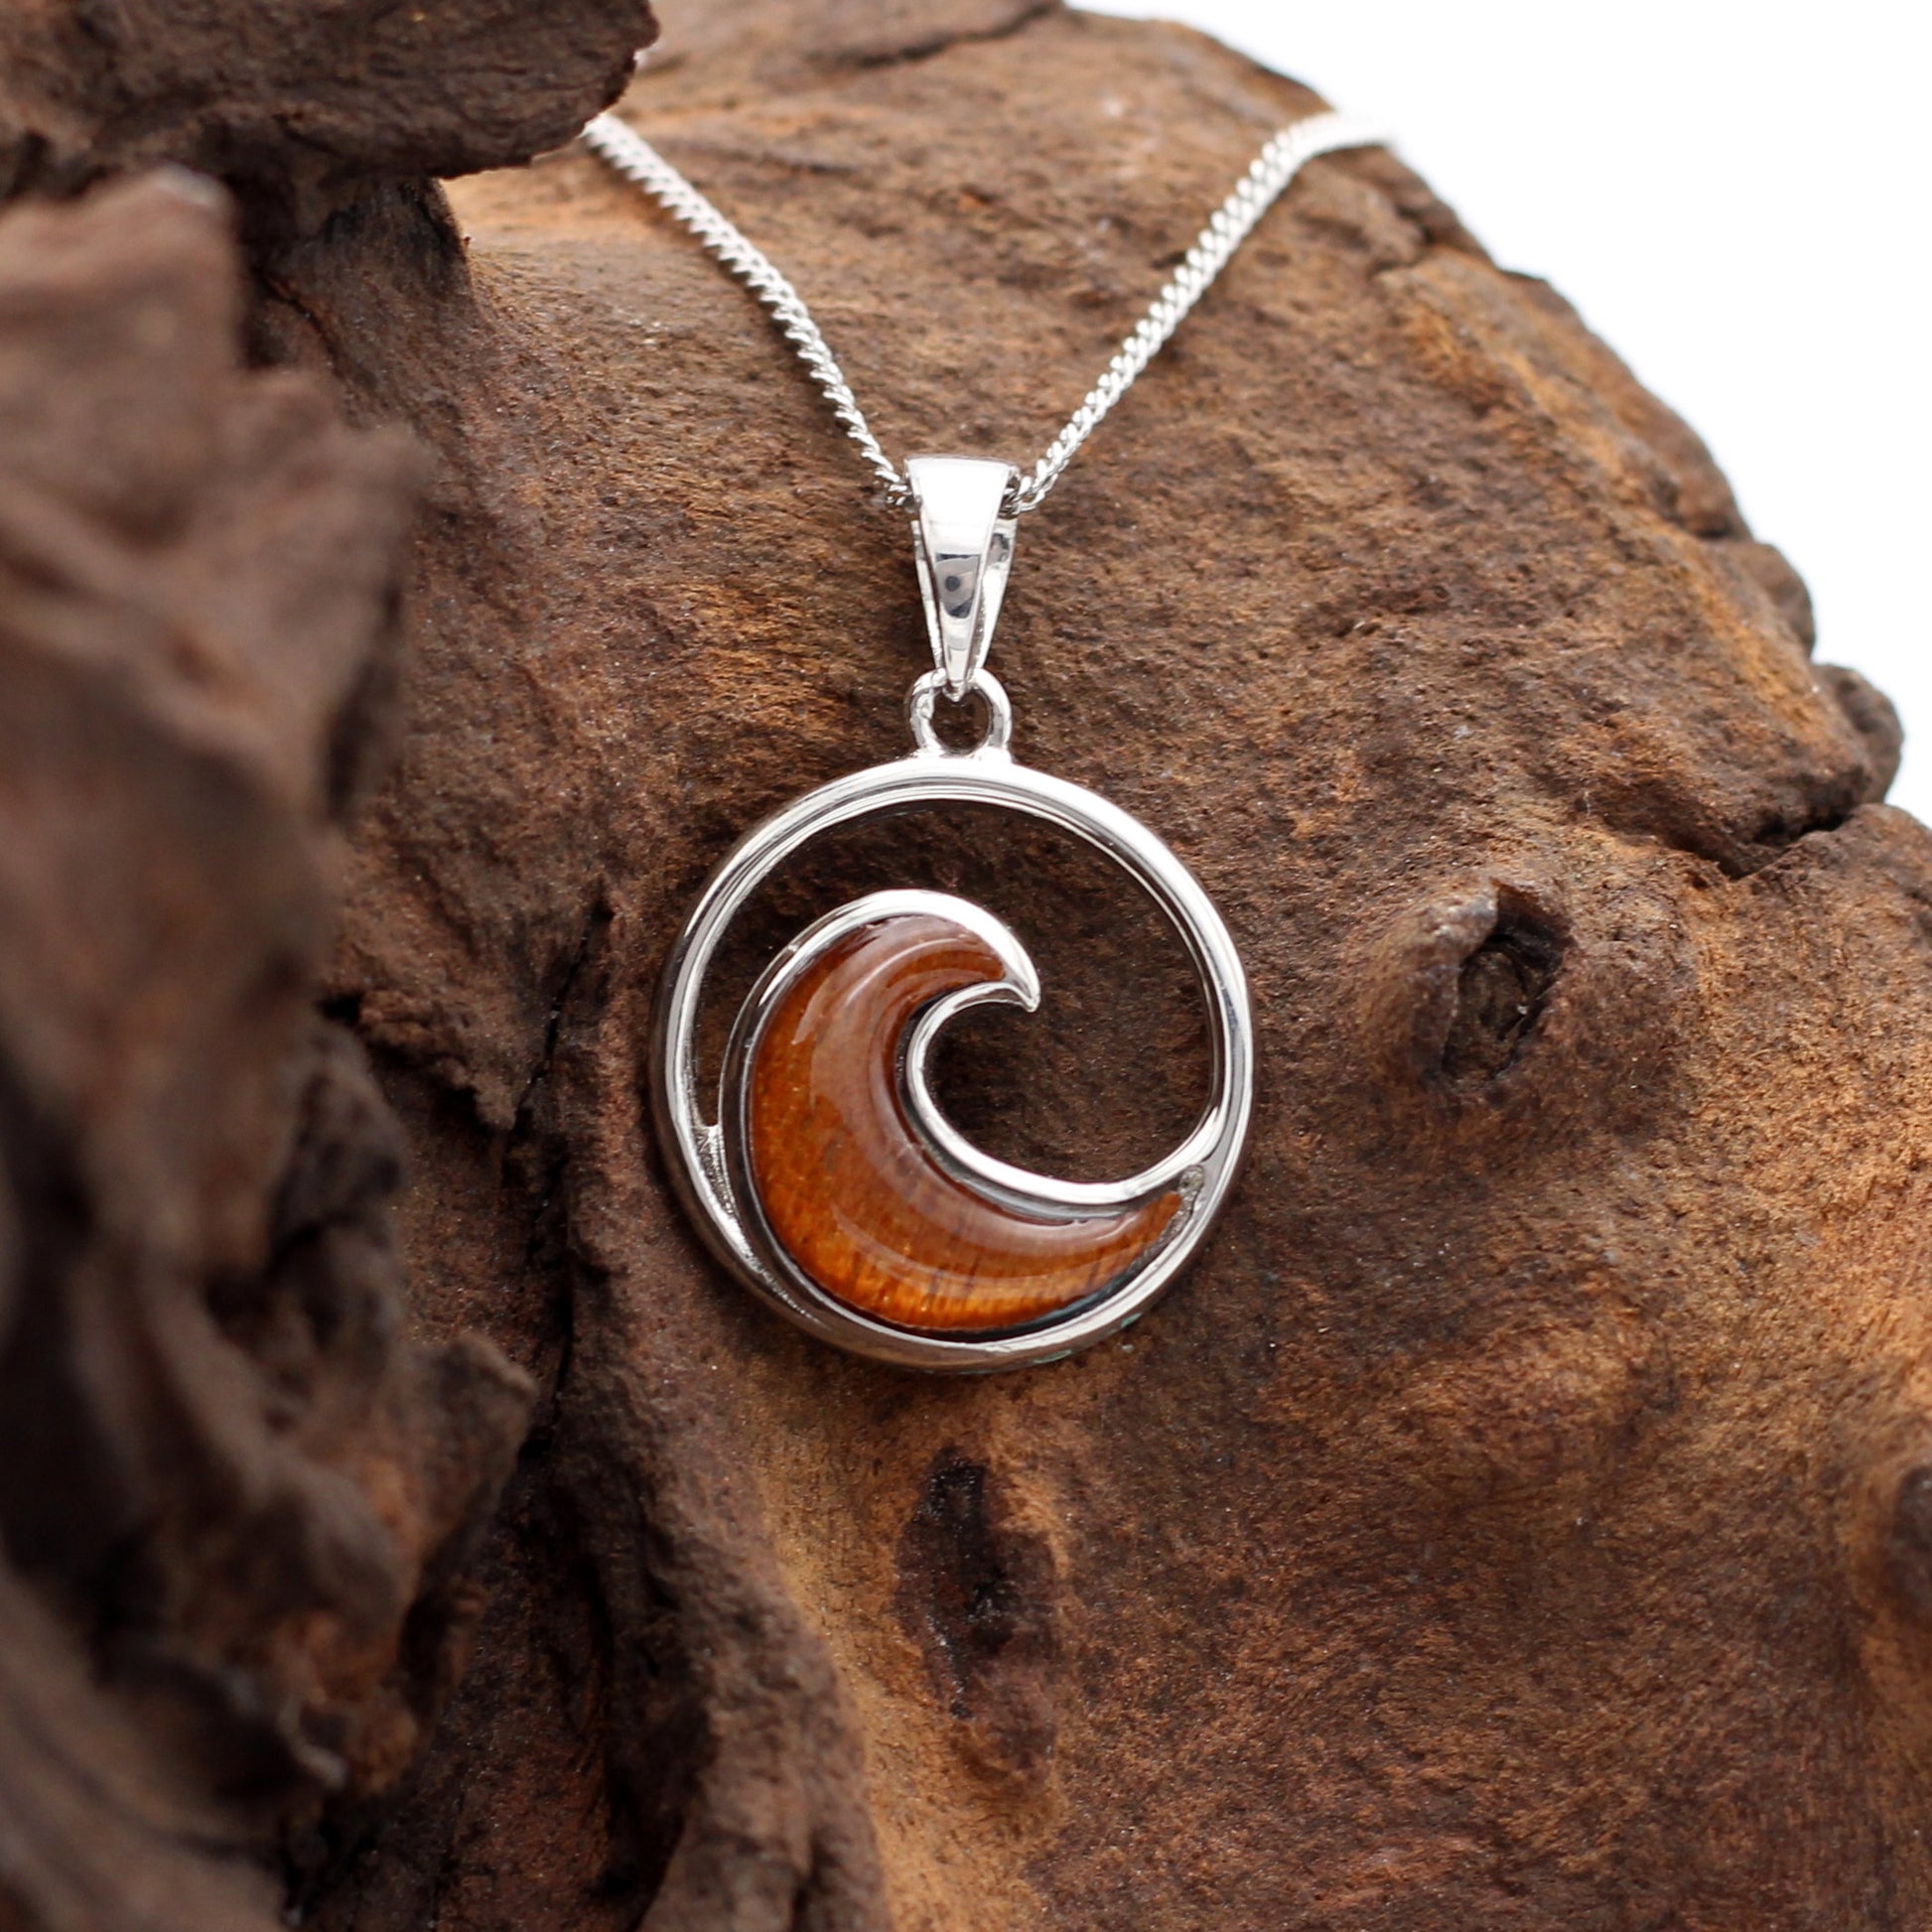 925 sterling silver wave pendant with koa wood inlay on a 40 cm chain (included).